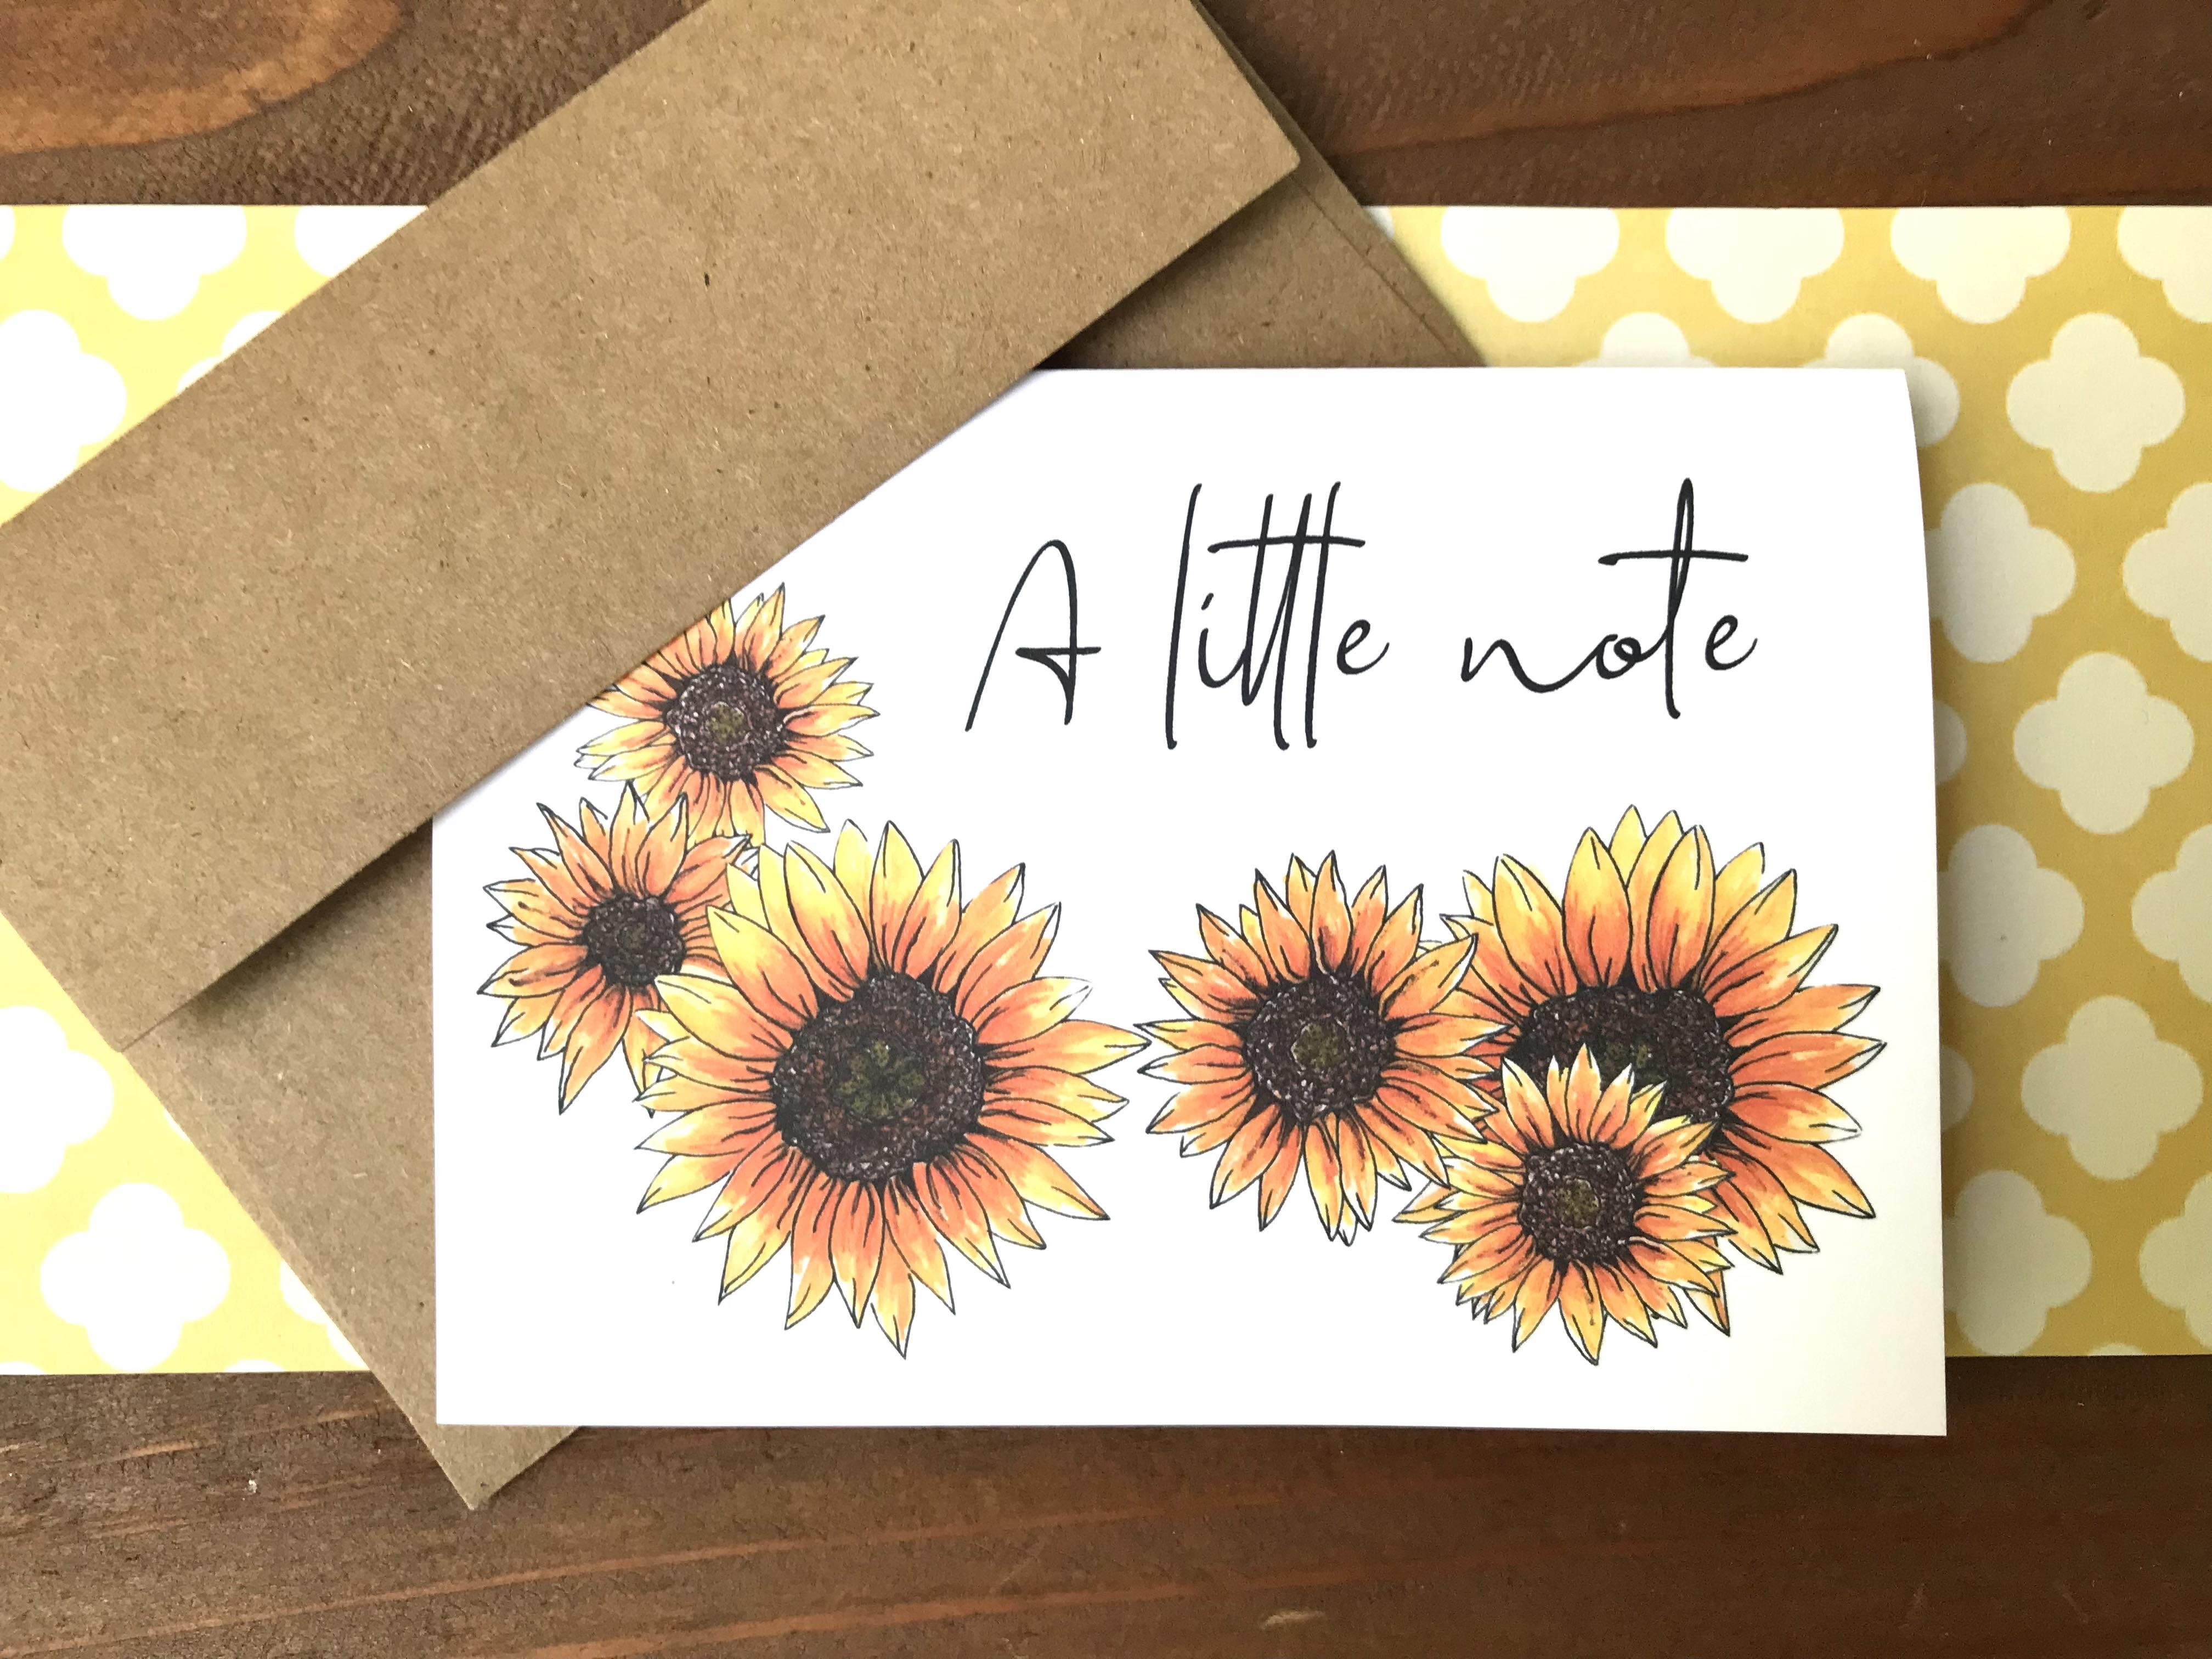 Sunflower Note Cards, Choose Your Message - Boxed Set of 8